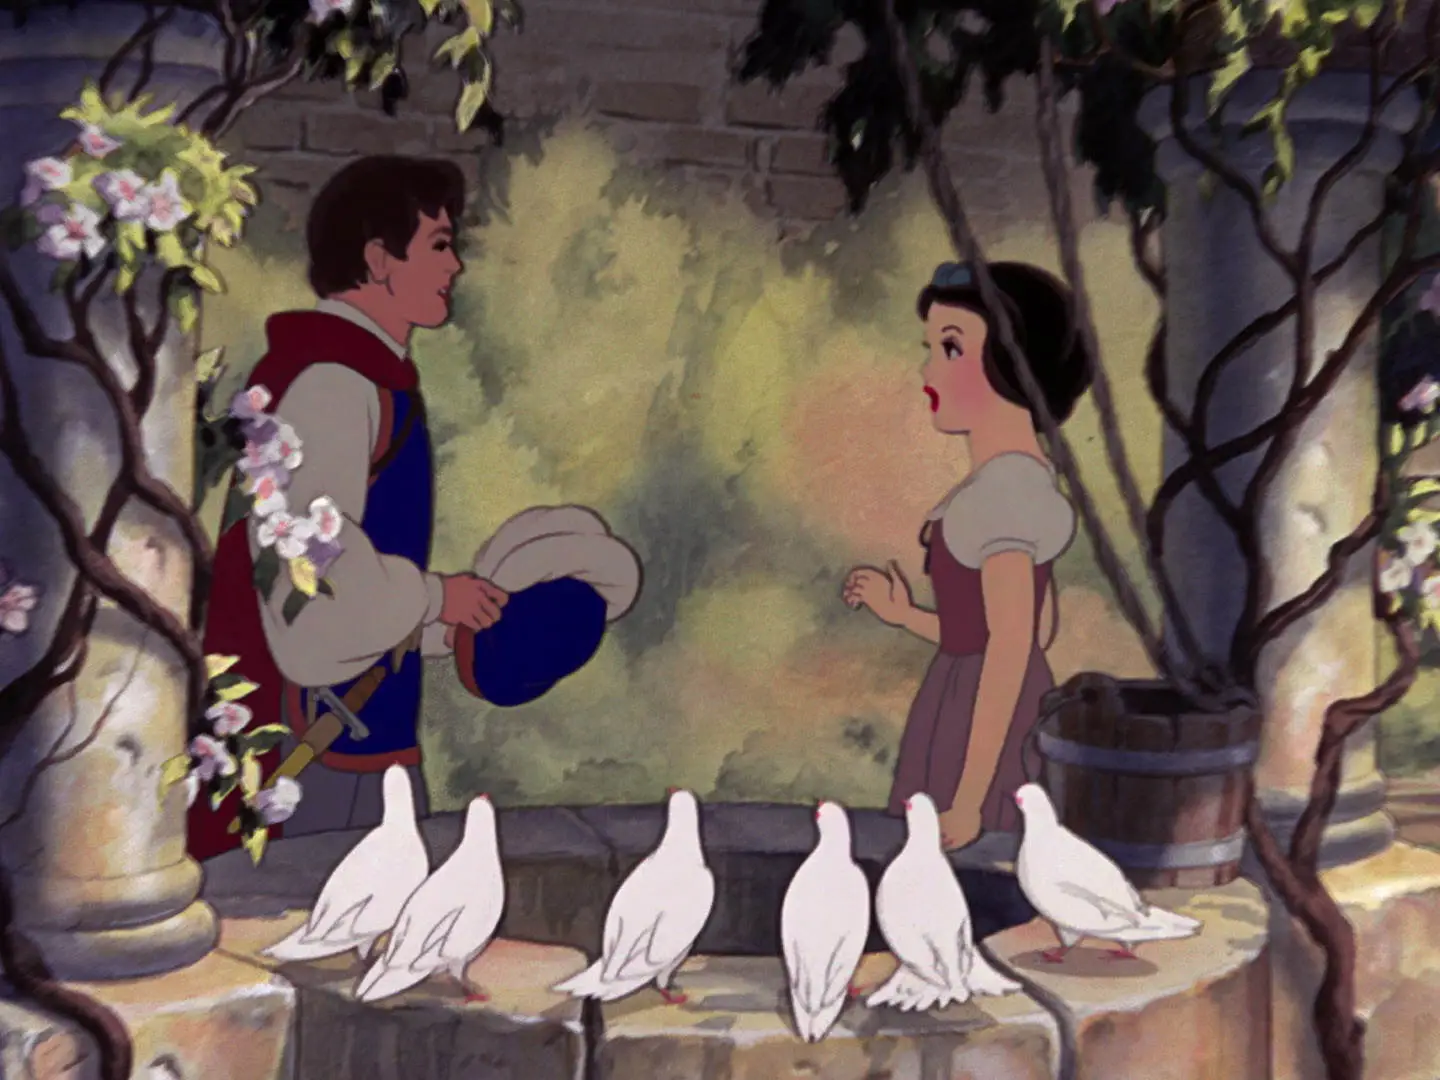 Snow White and the Prince, at the beginning of the film...